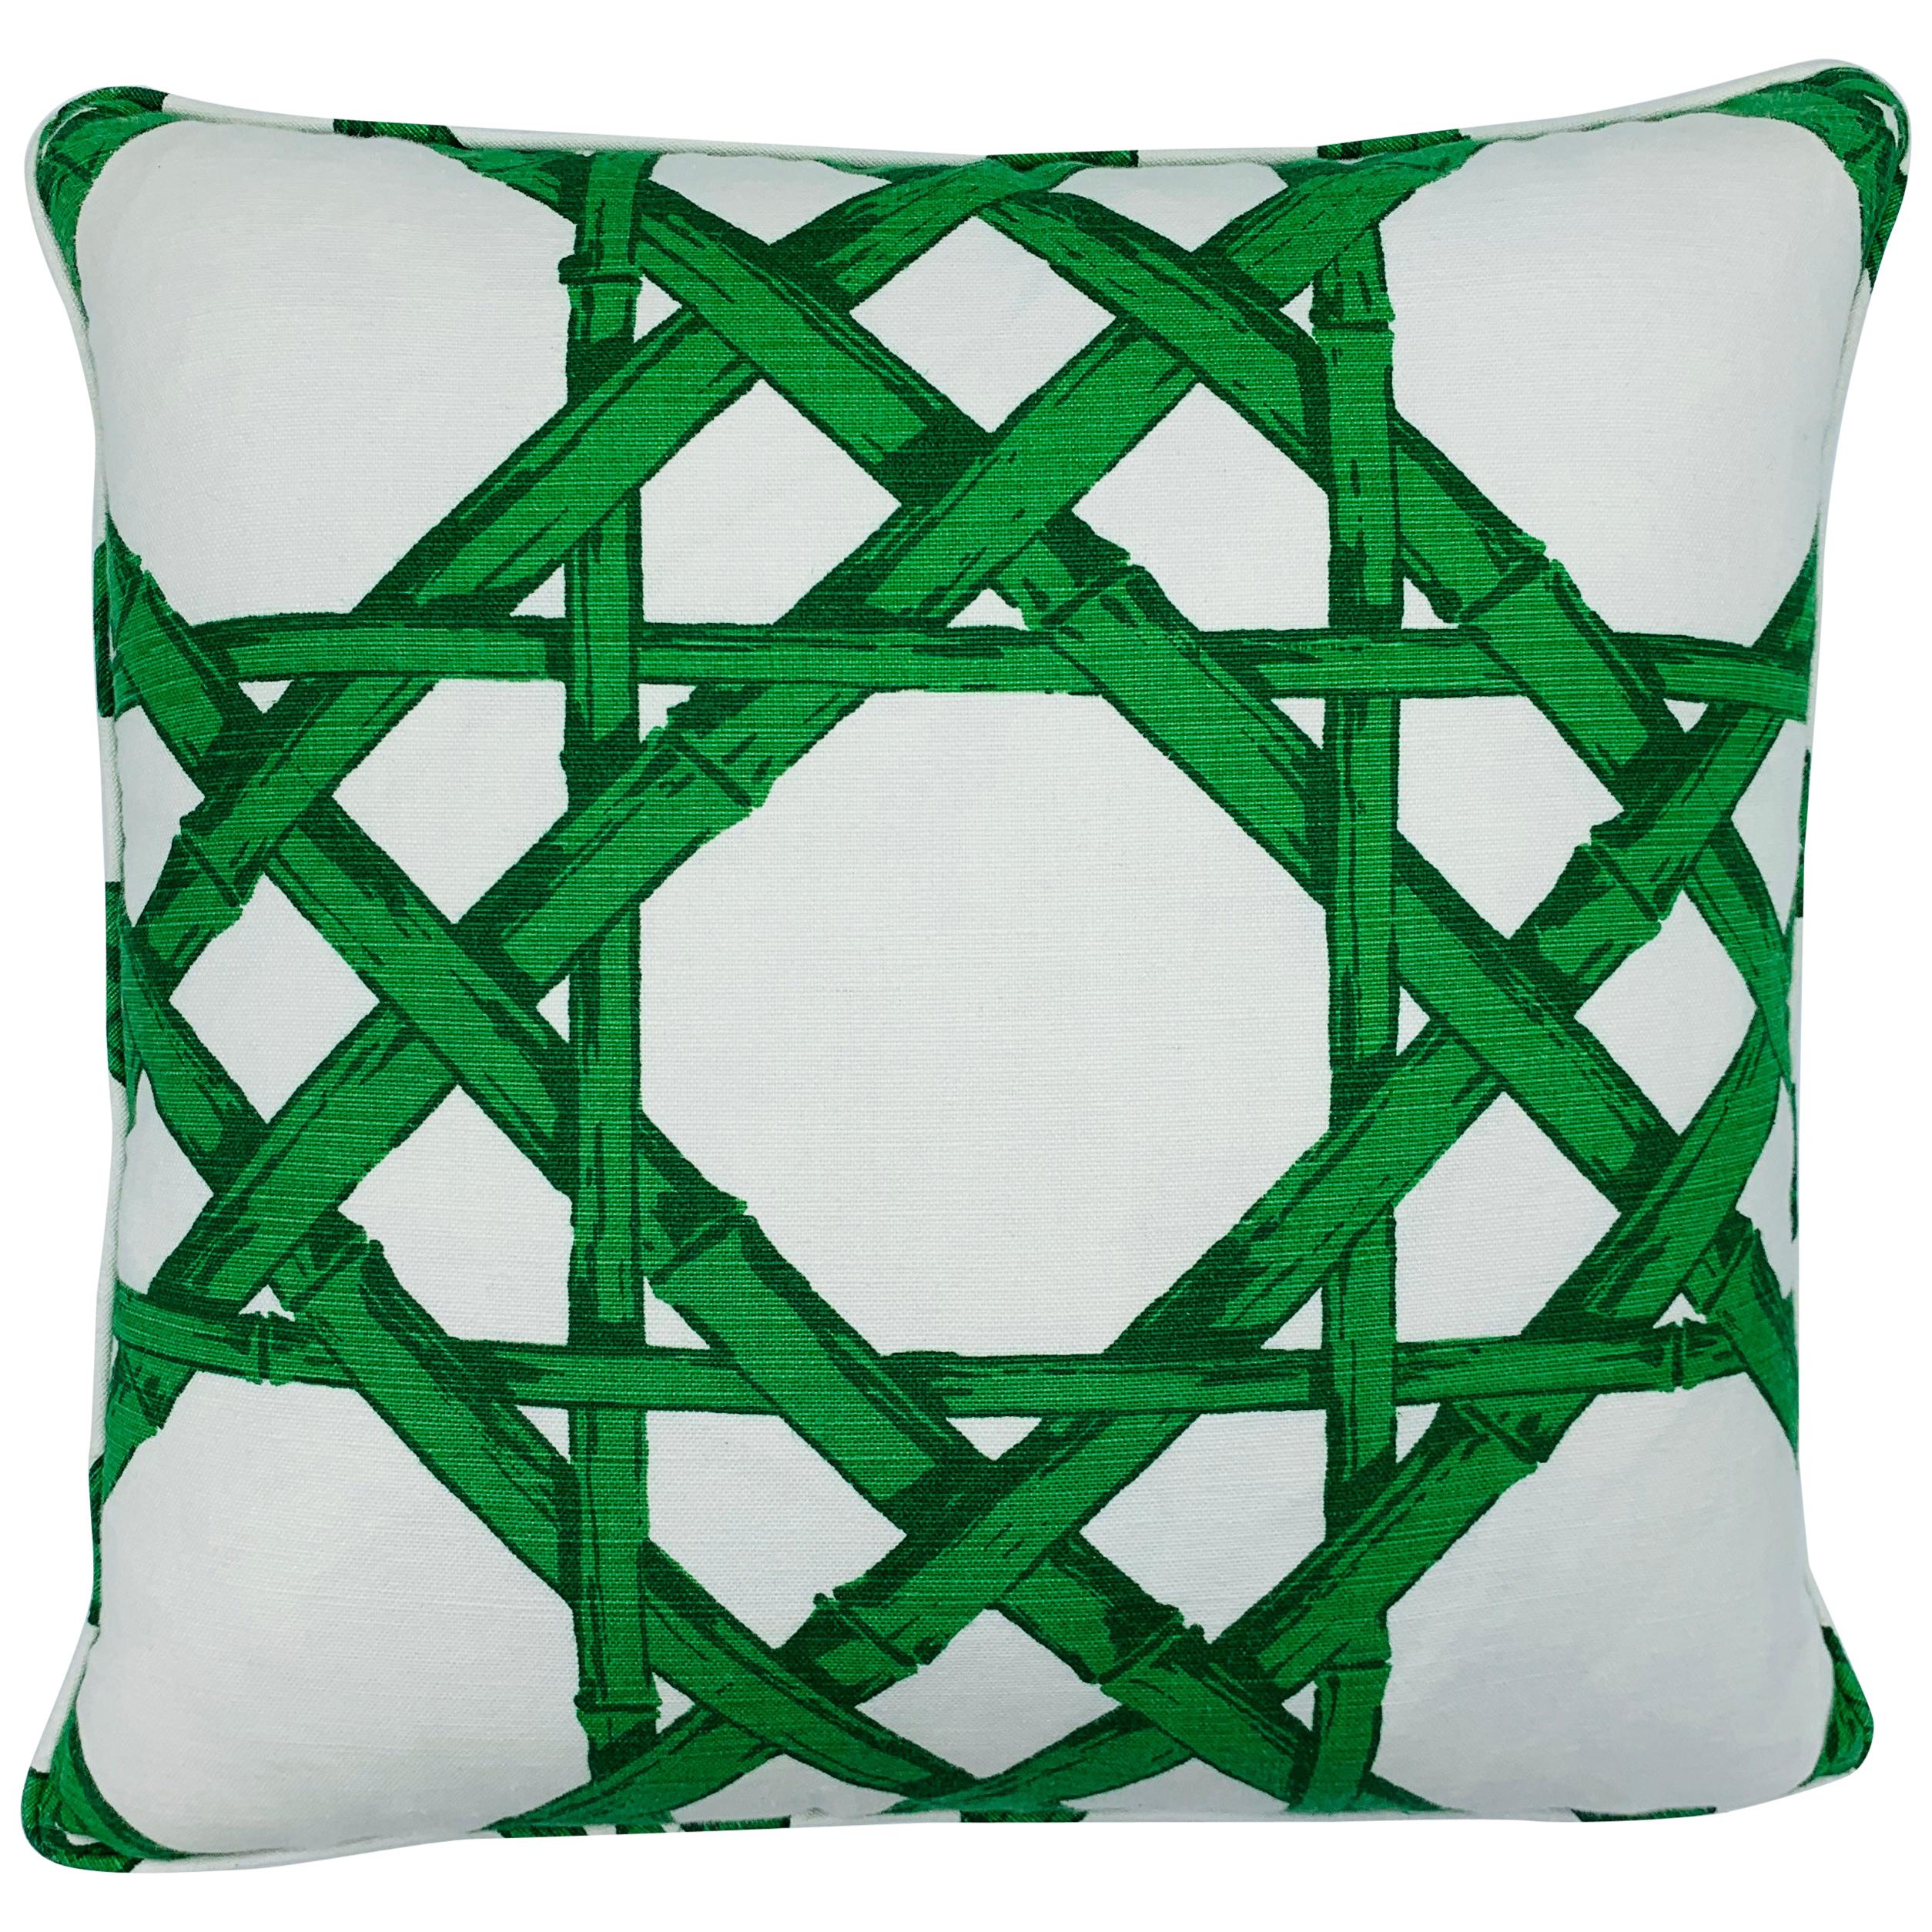 Thibaut 'Cyrus Cane' in Emerald Green and White Pillow, Custom For Sale